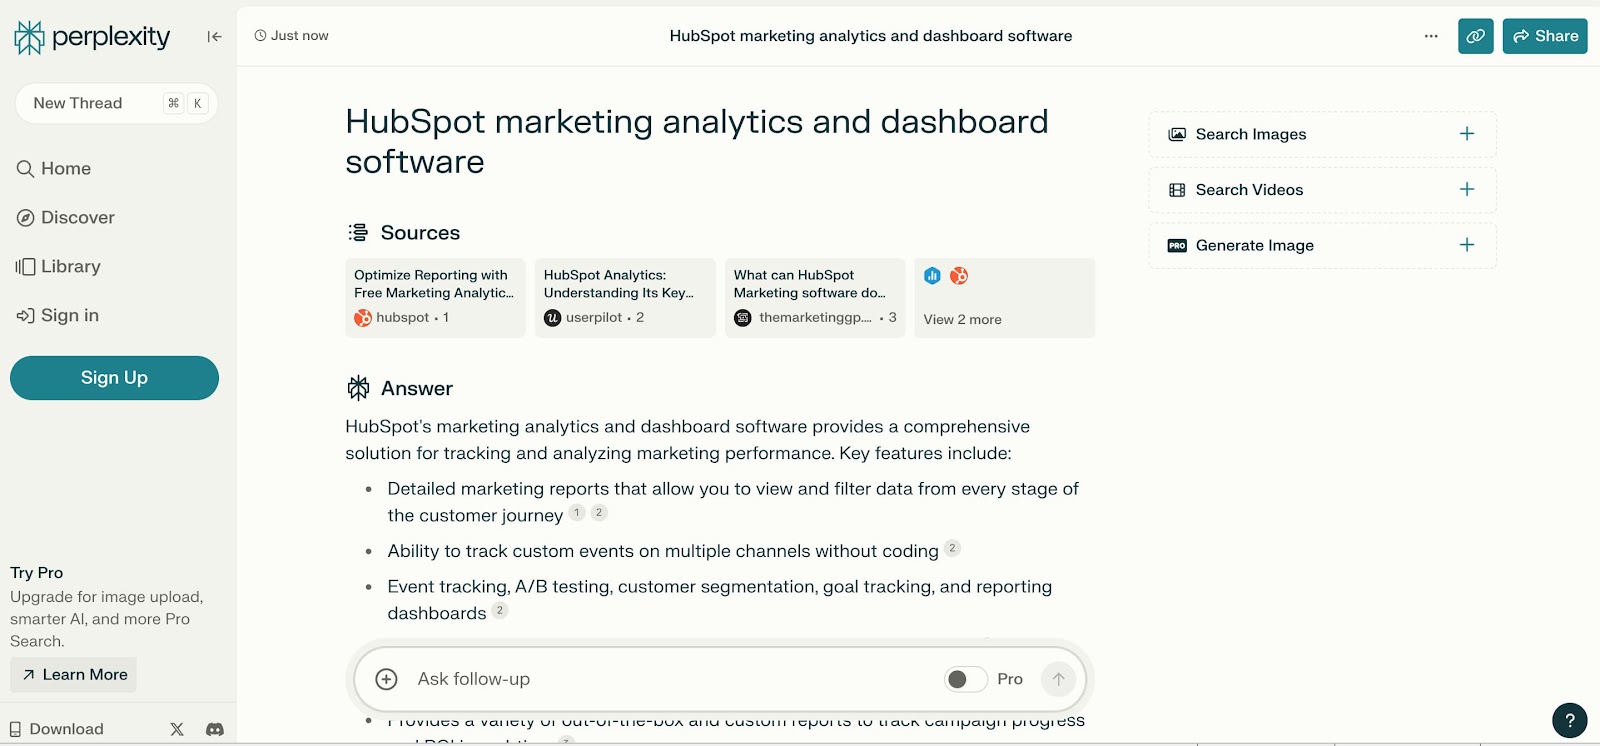 Perplexity search results for “HubSpot marketing analytics and dashboard software.”